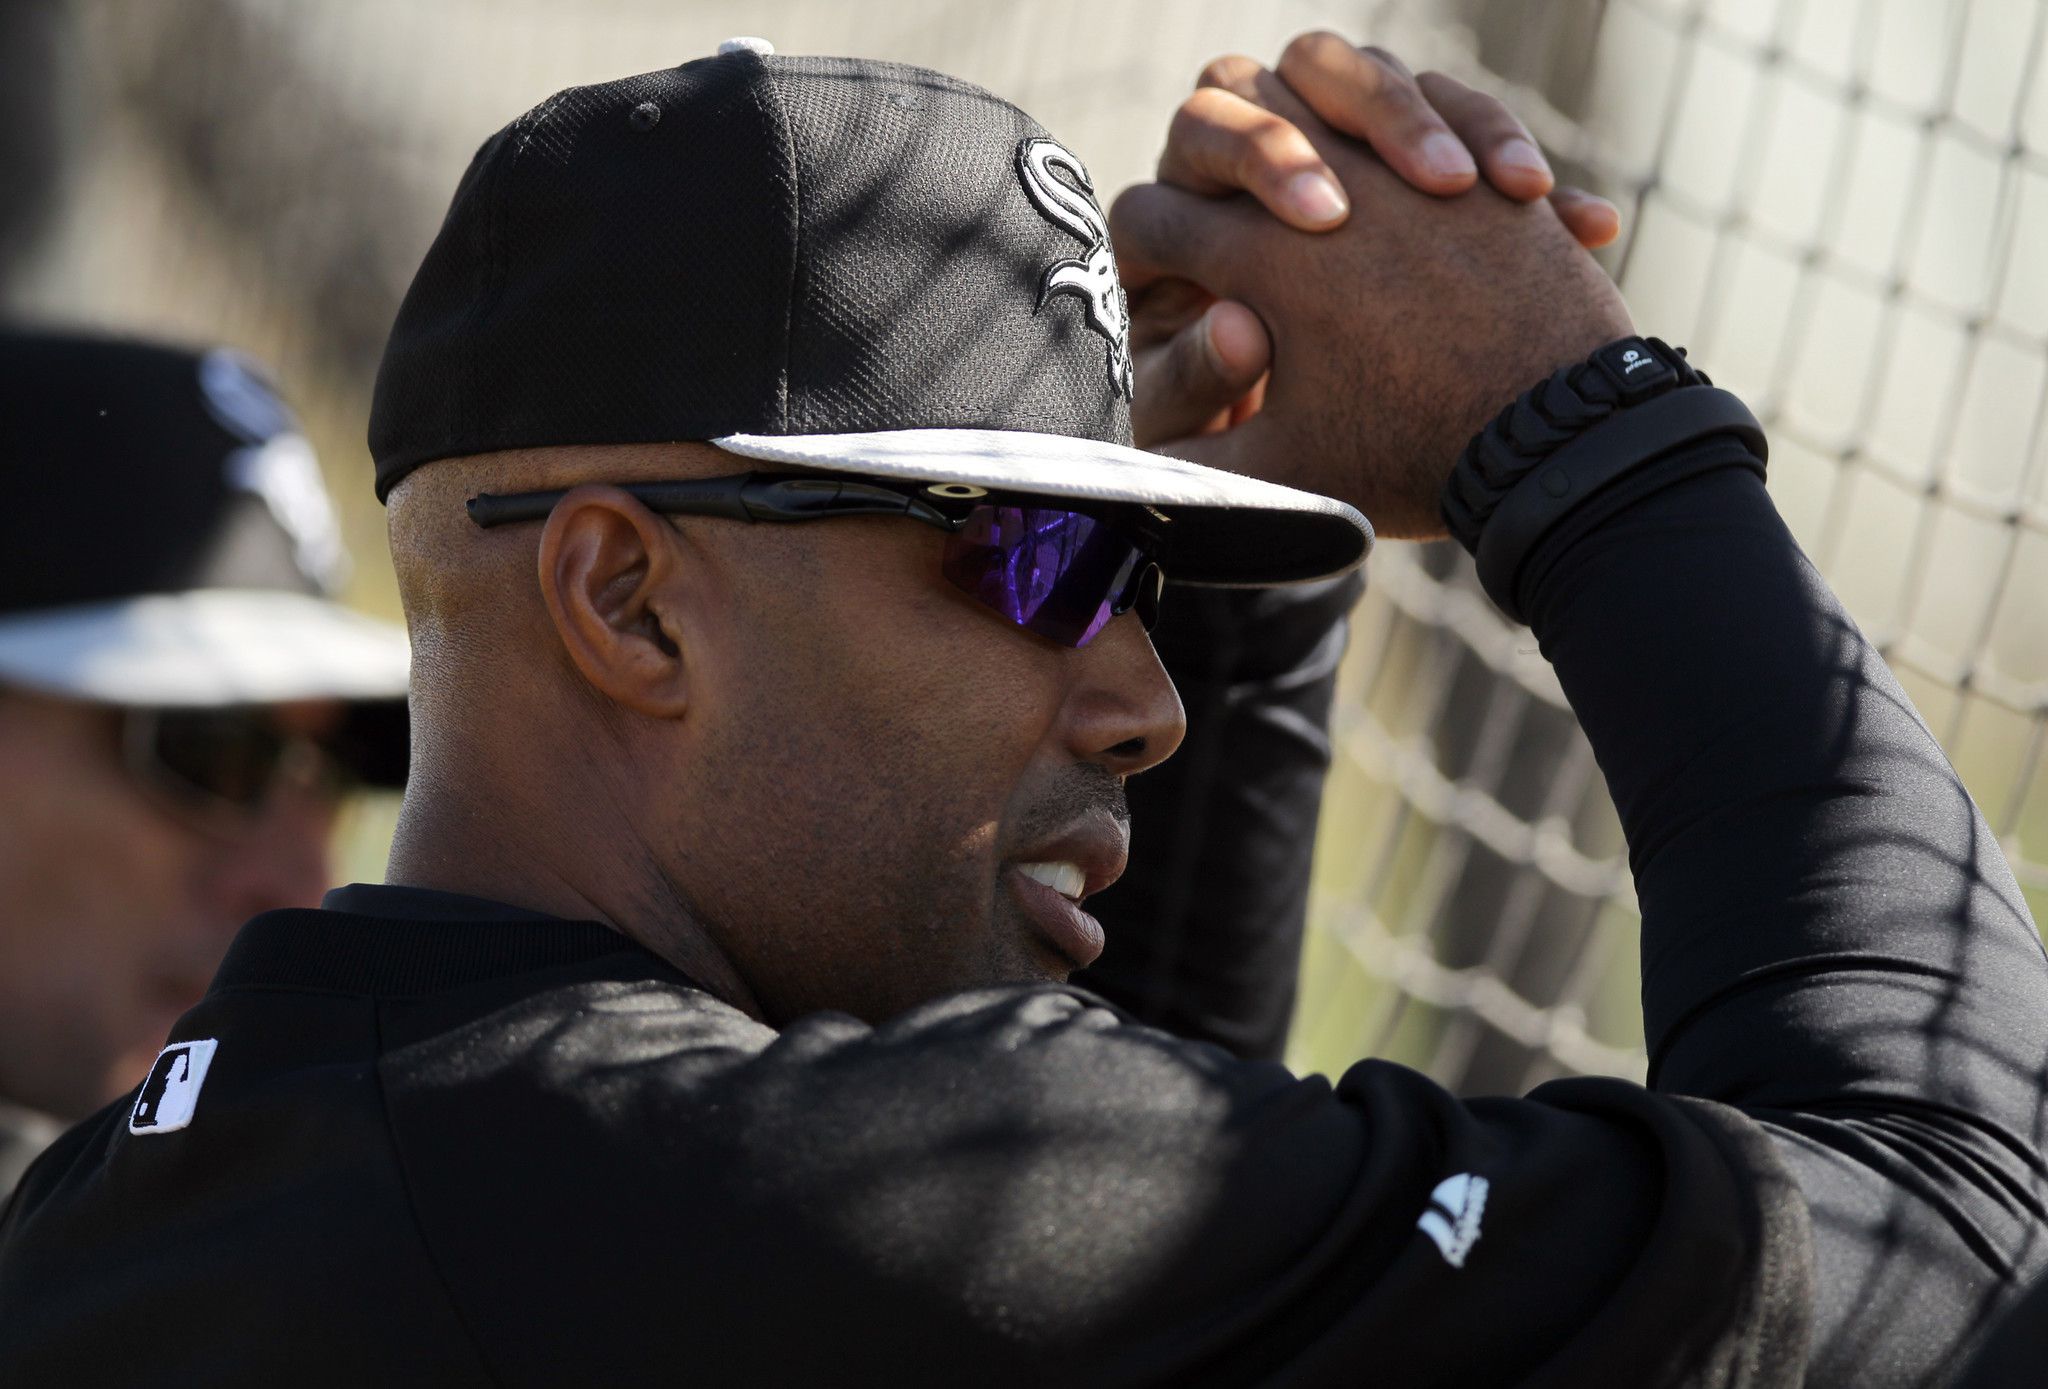 A man of few words, White Sox legend Harold Baines let his bat do the  talking — all the way to the Hall of Fame